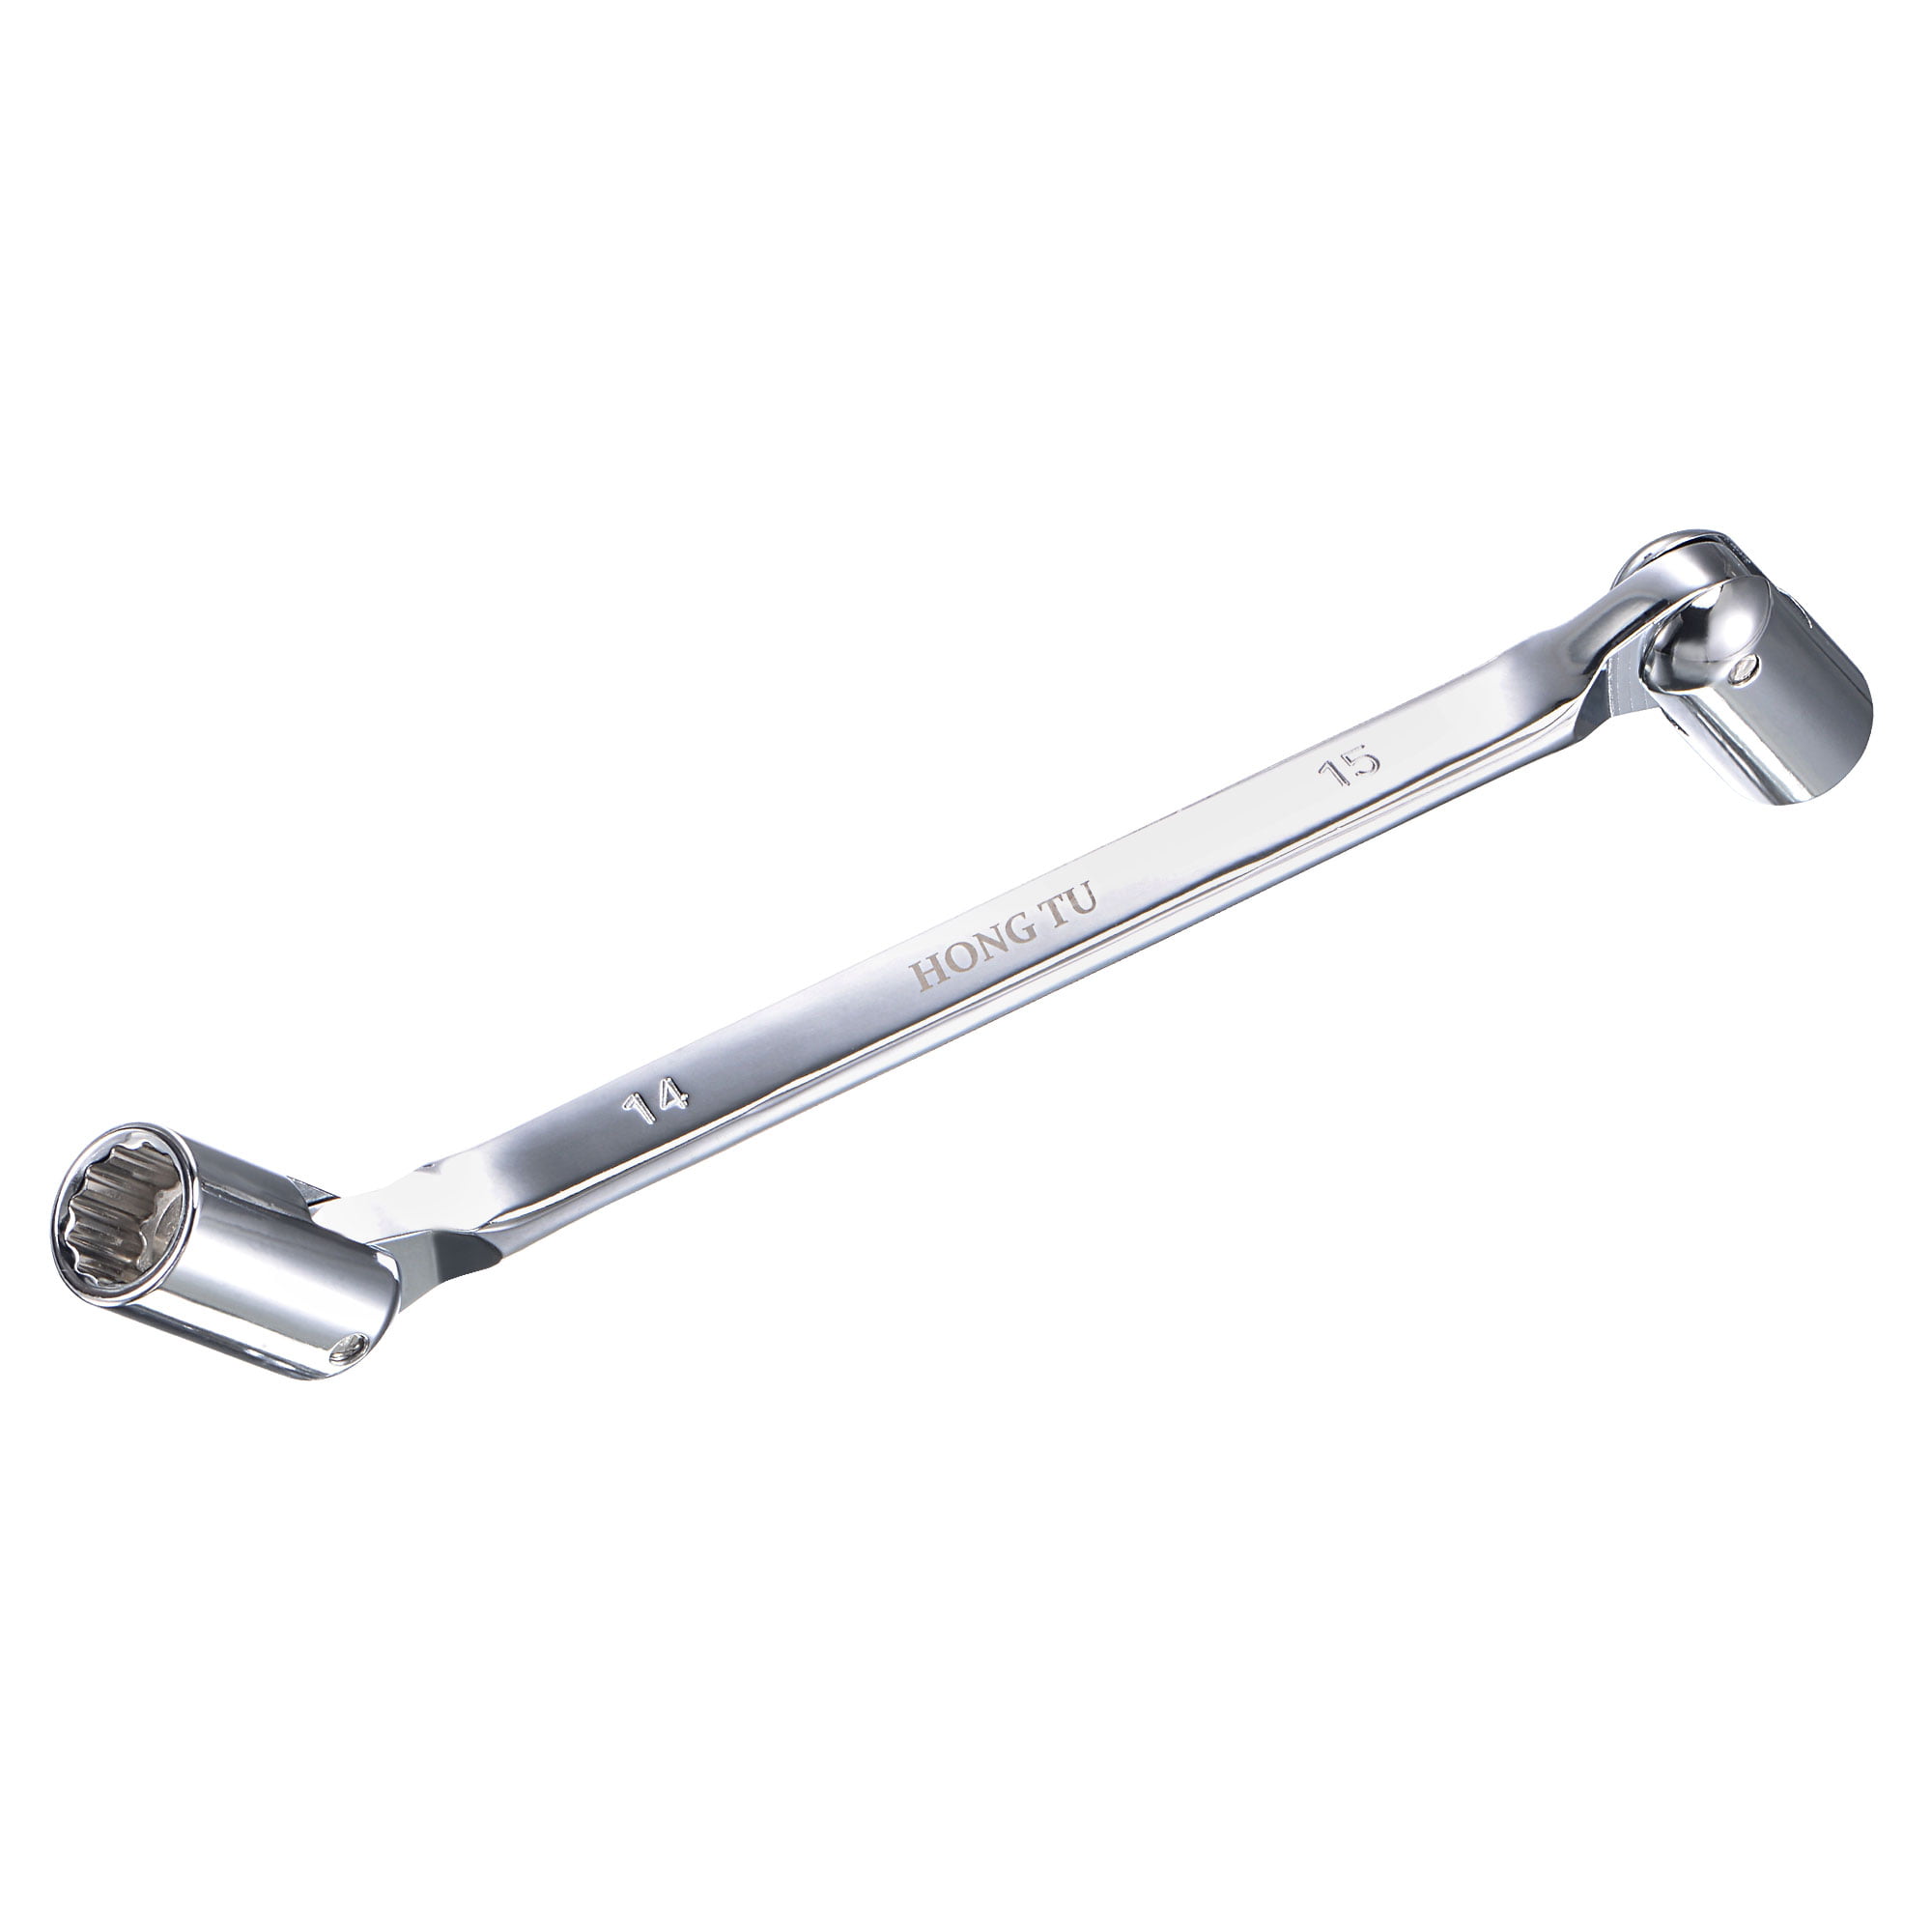 uxcell 14mm x 17mm Chrome-Vanadium Steel Metric Open End Wrench Spanner 